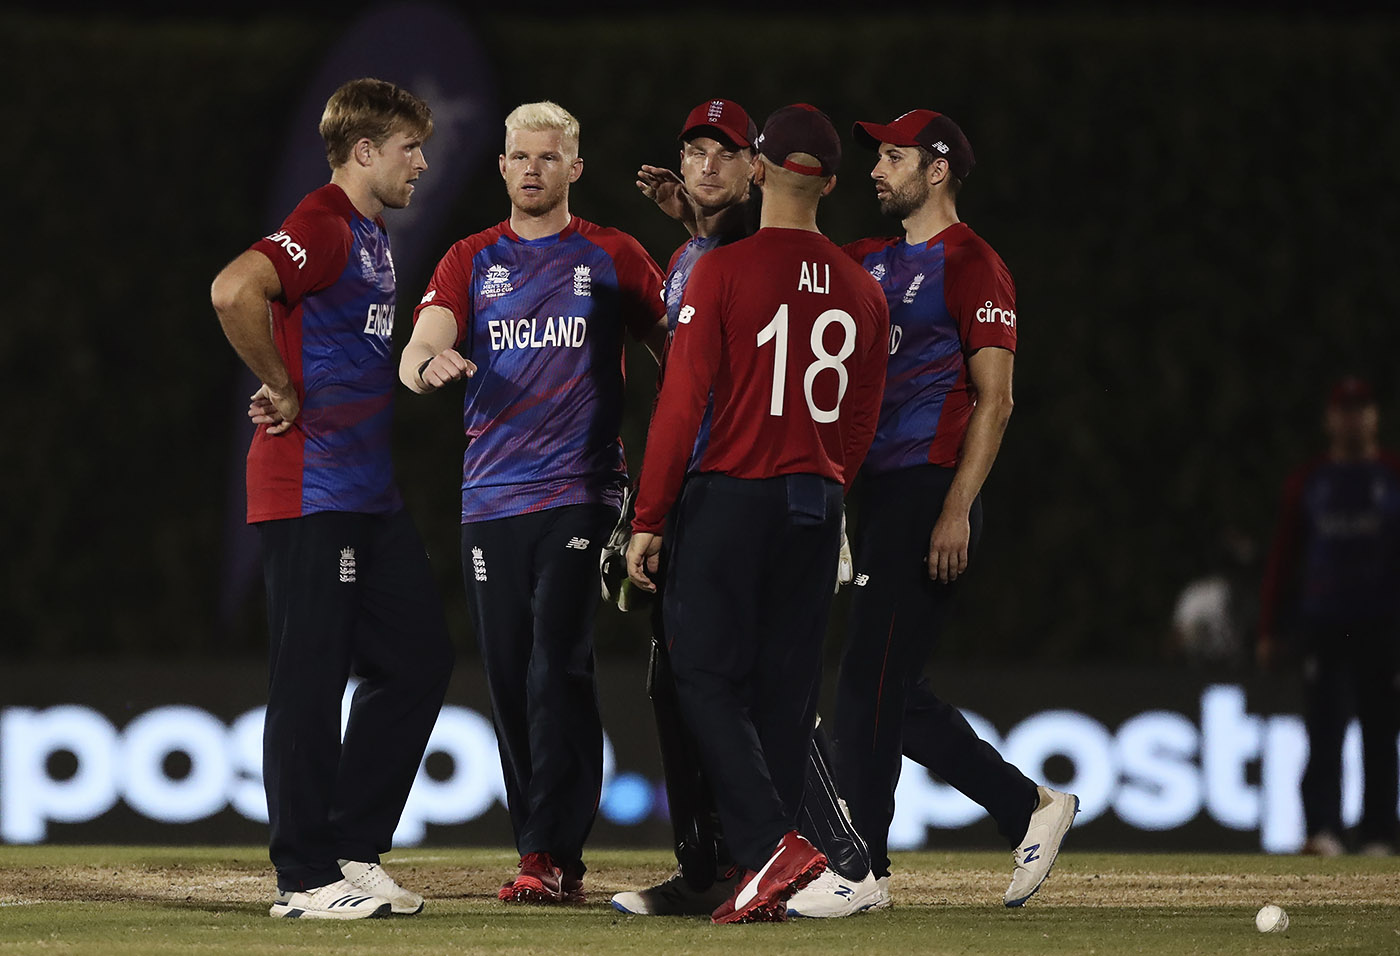 ICC T20 World Cup 2021: “It’s Too Easy For England Right now” – Michael Atherton